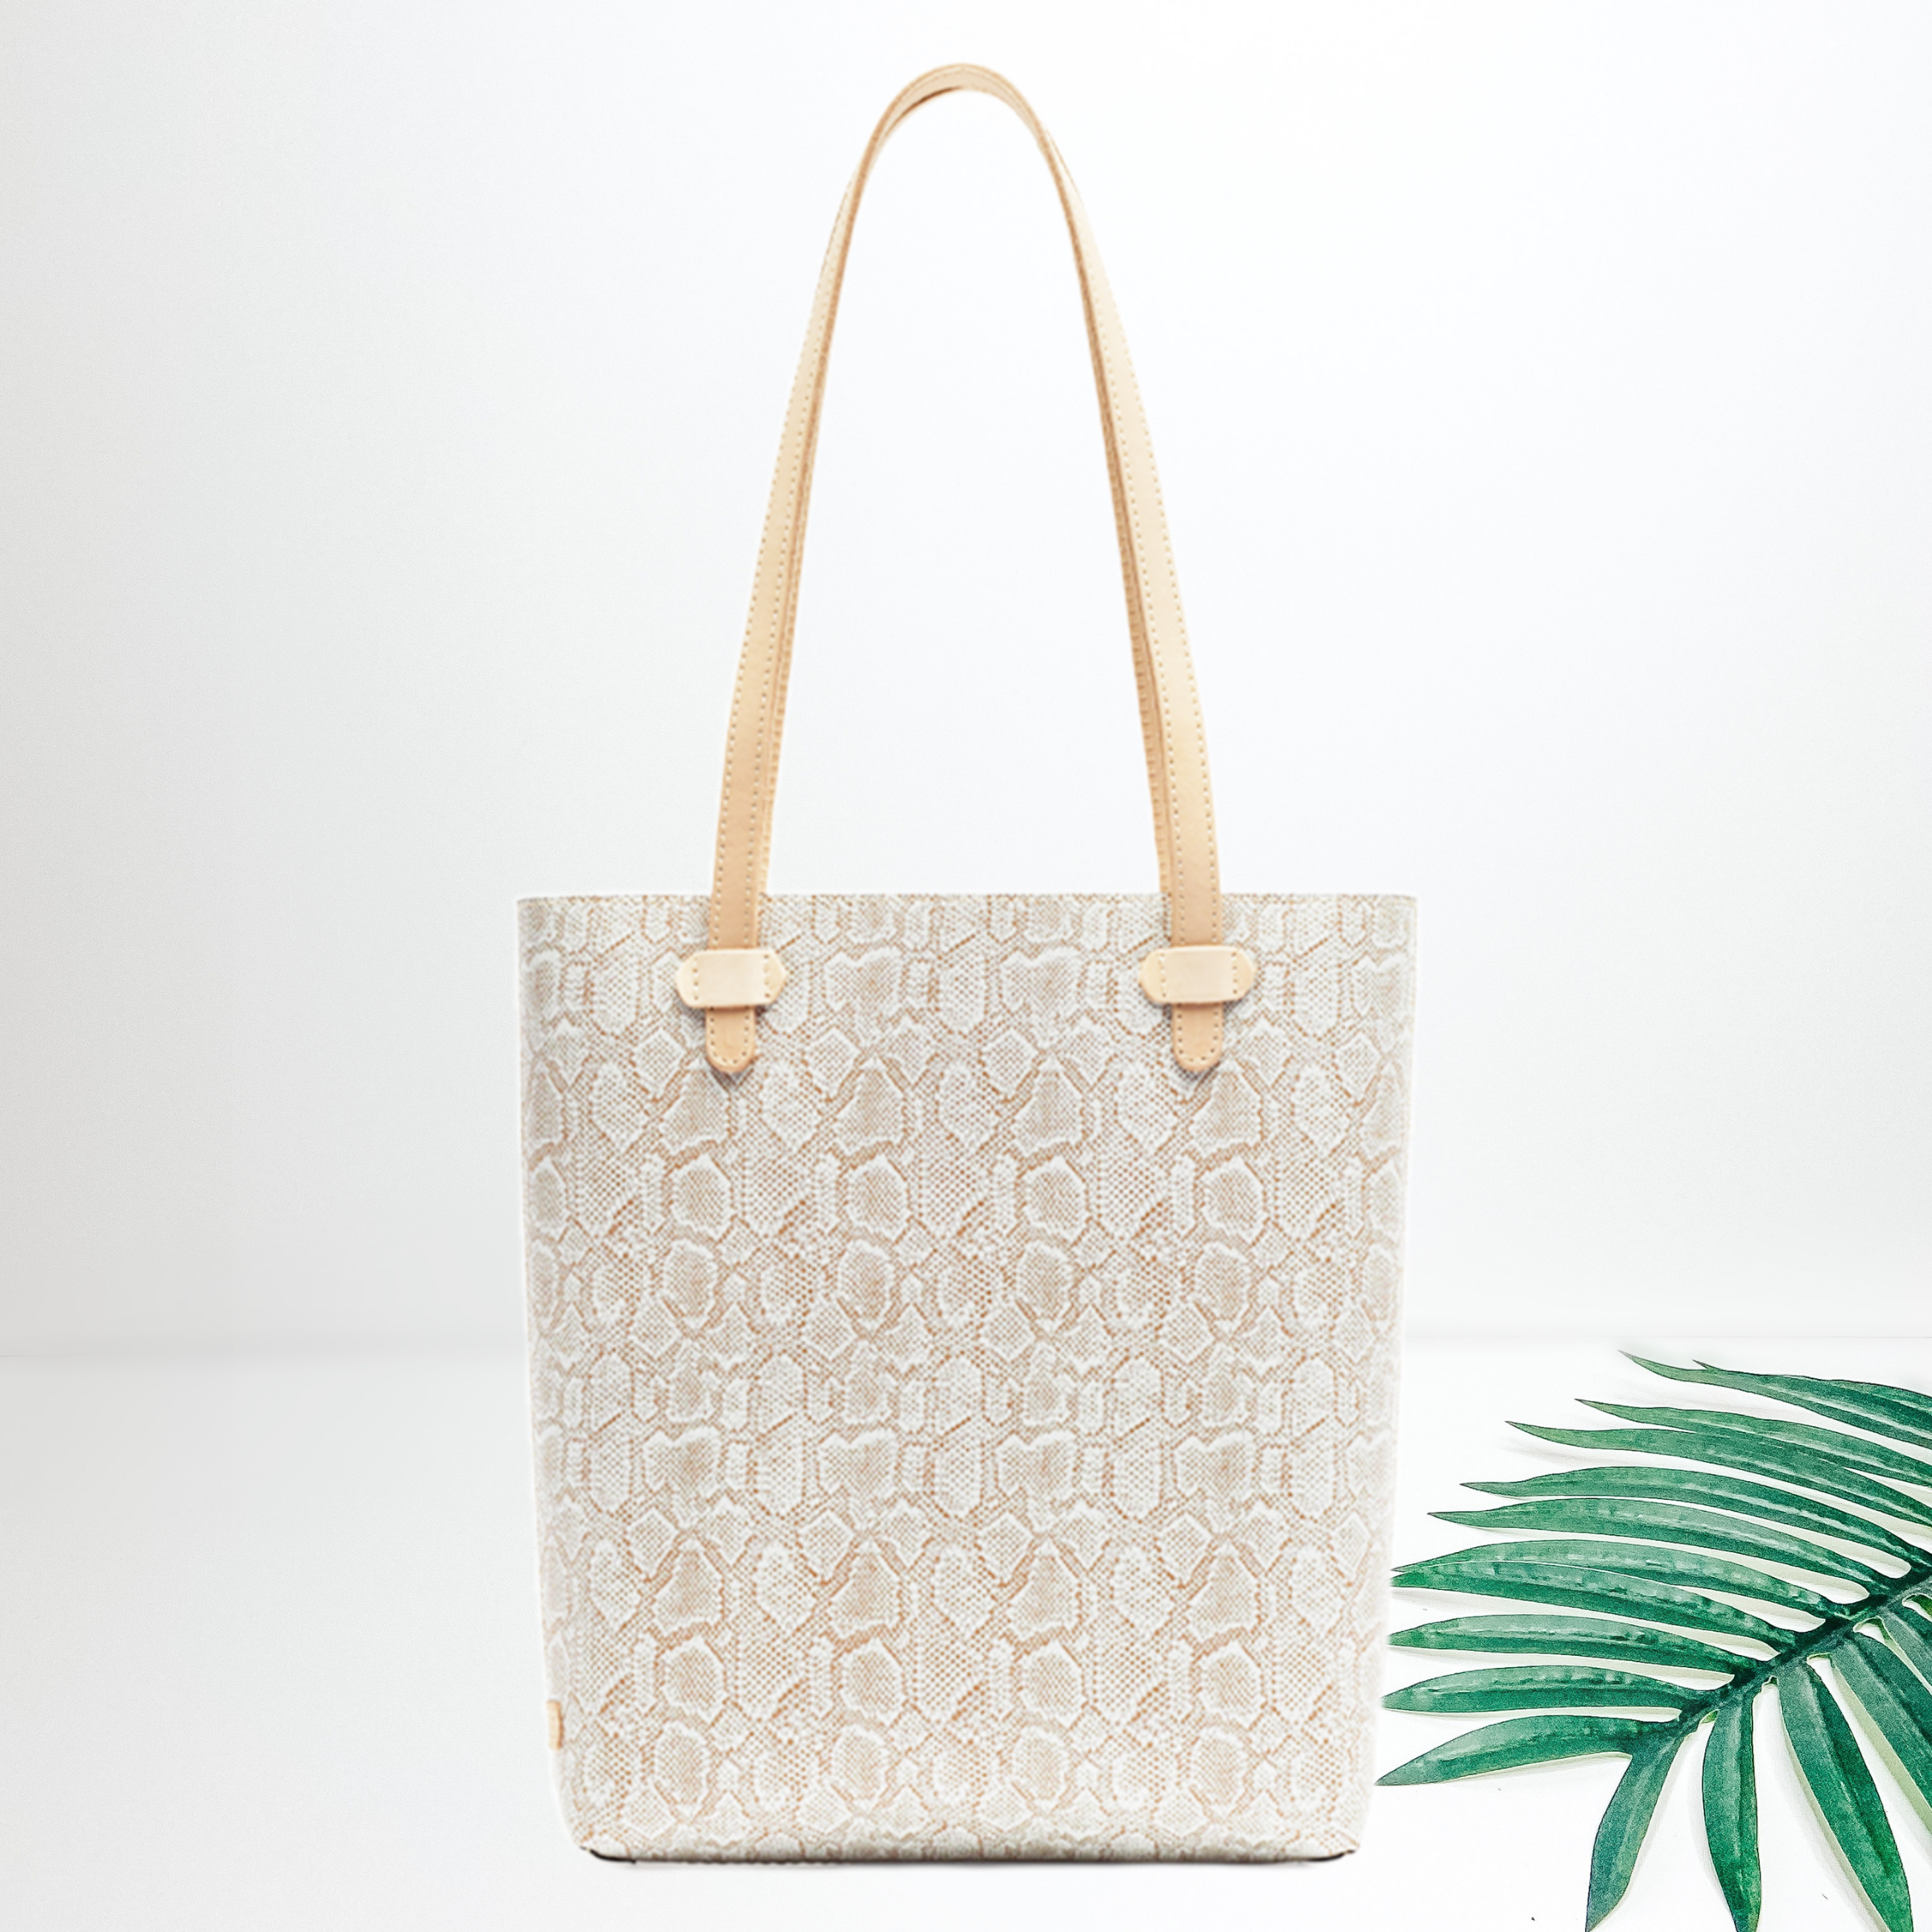 Centered is a cream and white snakeskin tote. To the right of the tote is a palm leaf, all on a white background. 